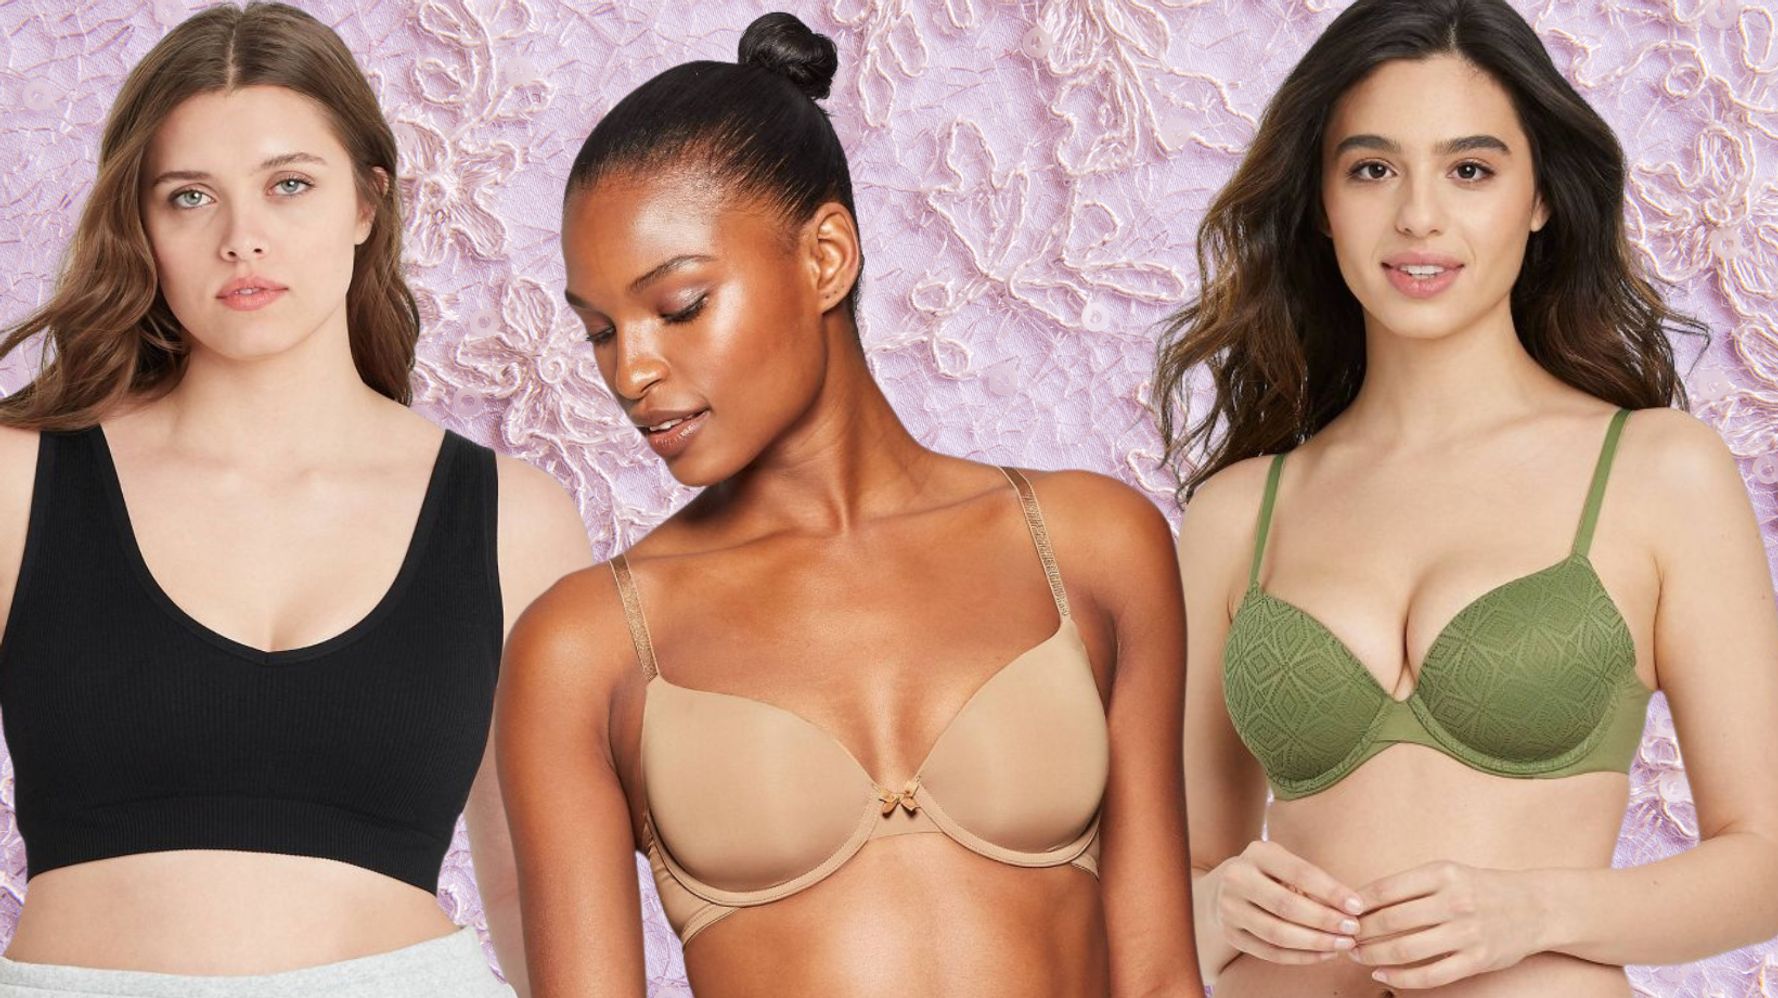 This Seamless Bralette Is the Most Comfortable Thing I Own—and